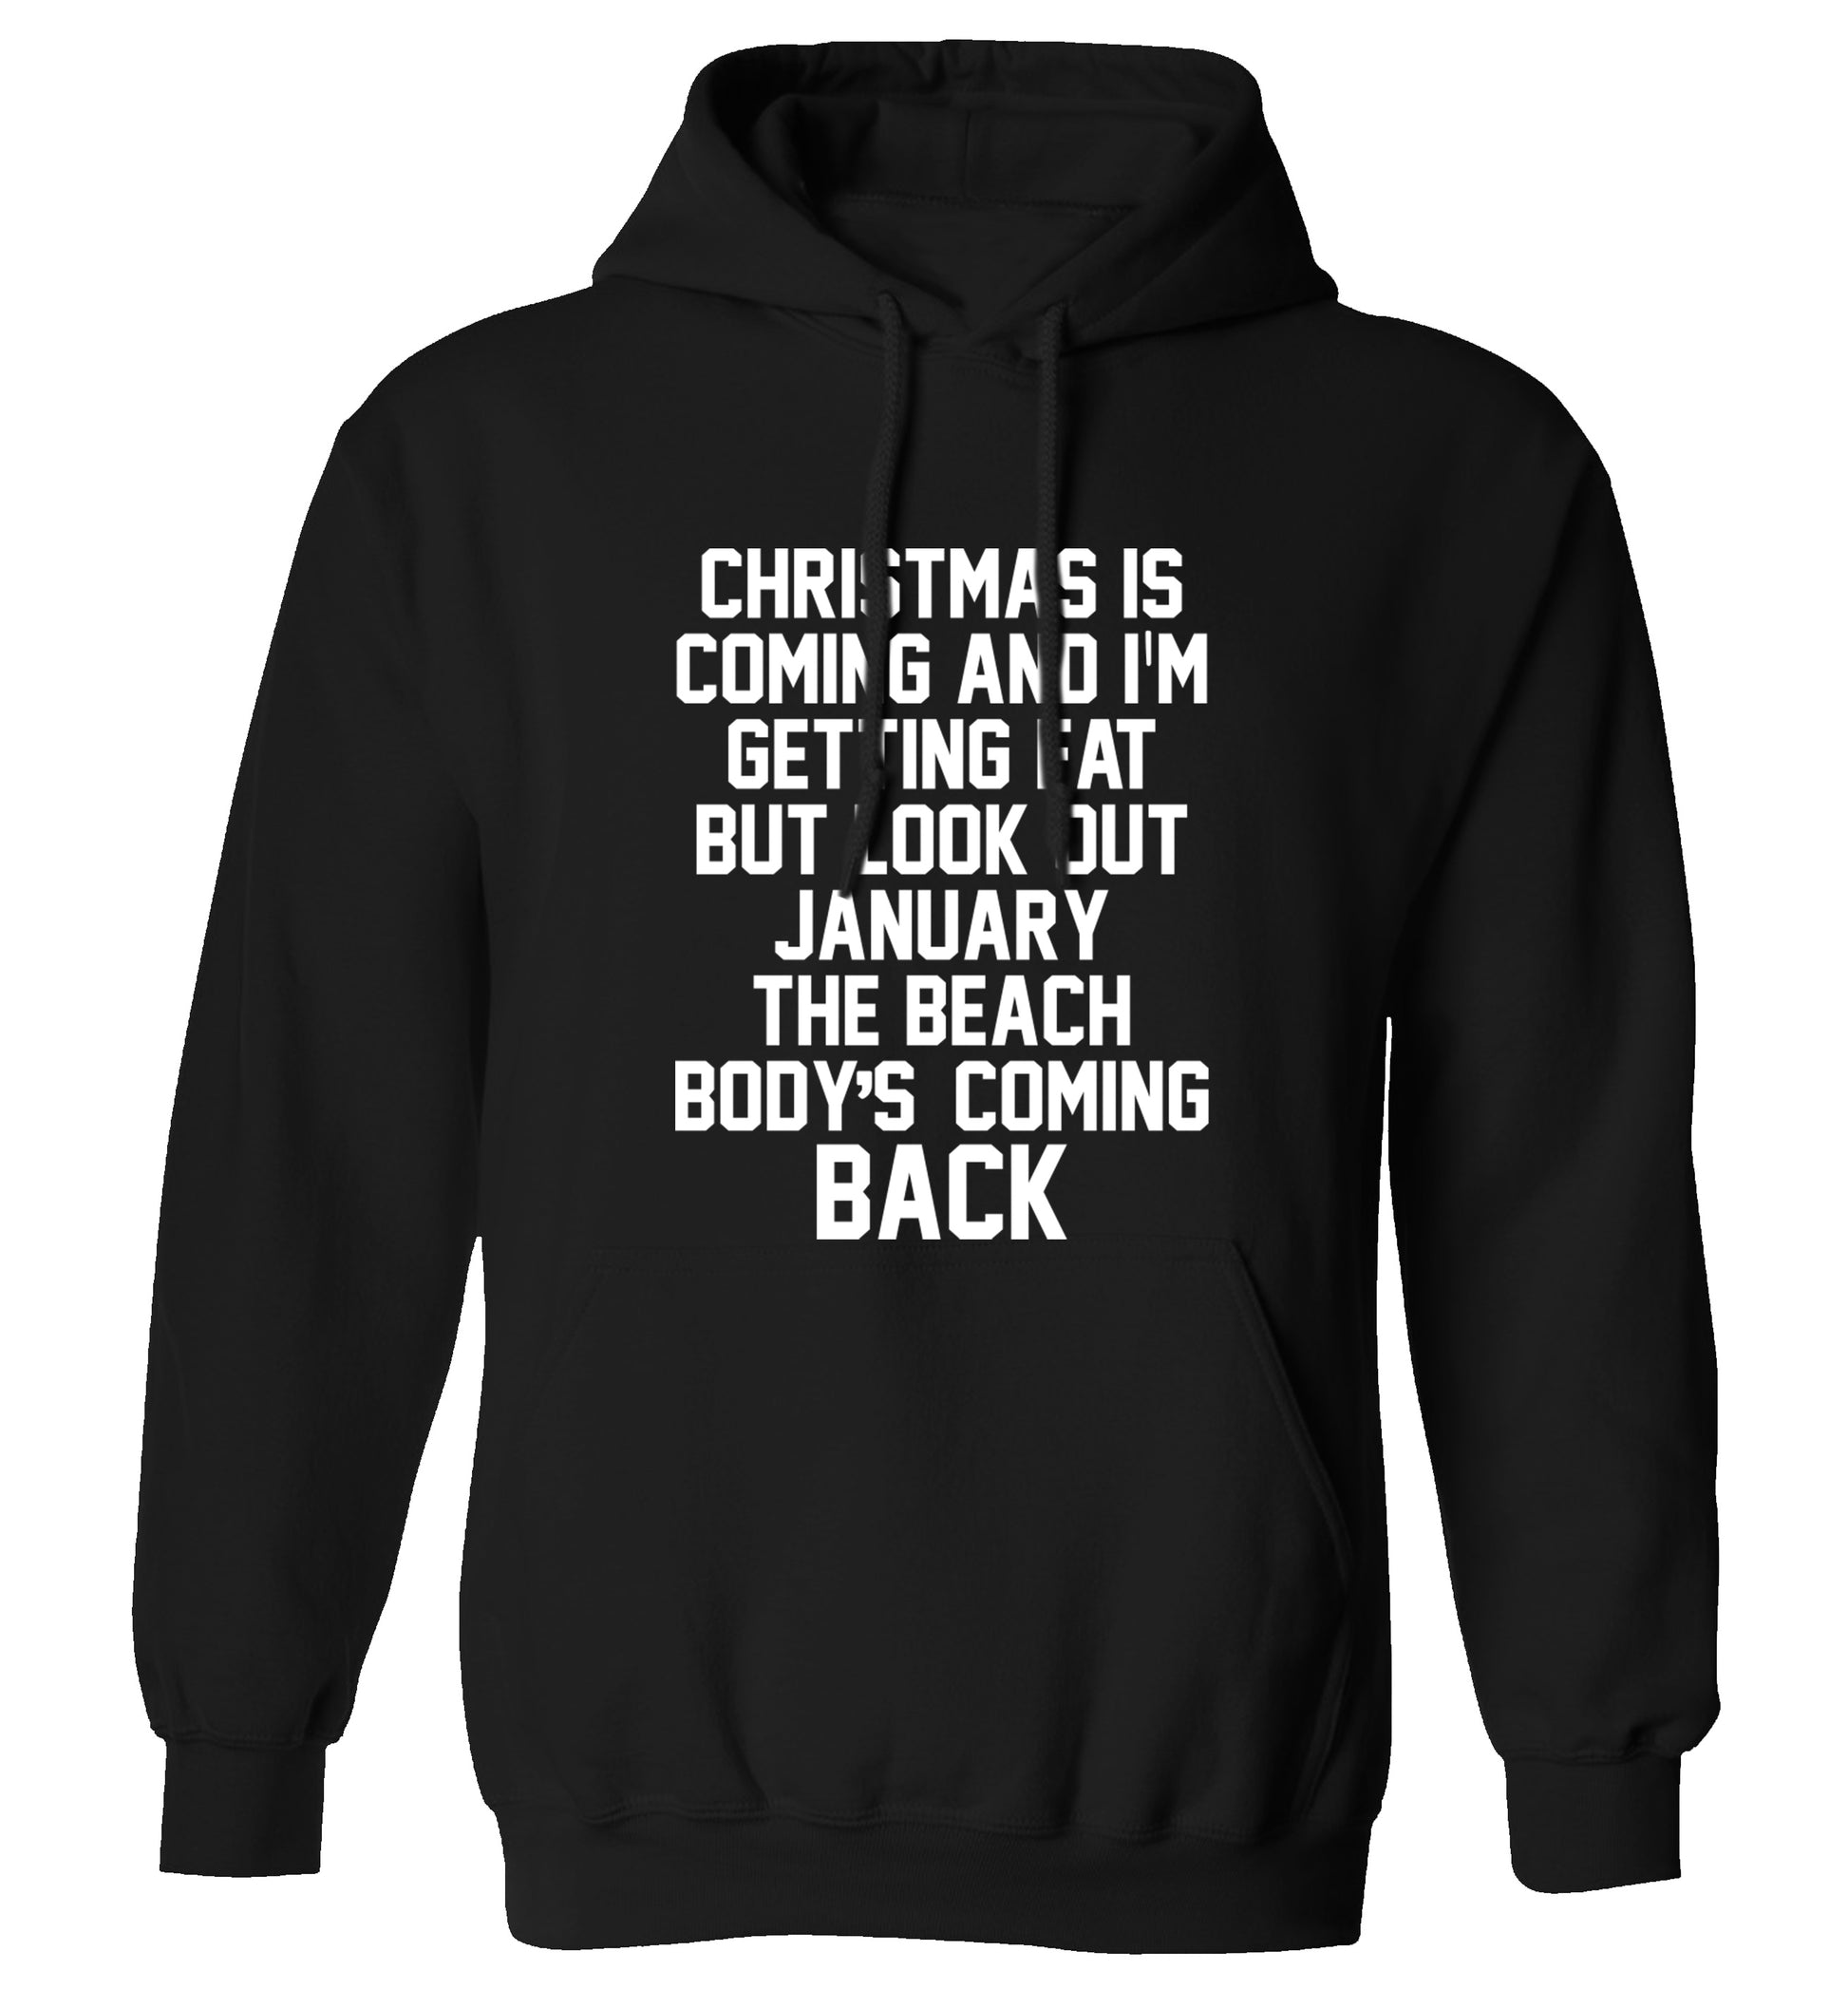 Christmas is coming and I'm getting fat but look out January the beach body's coming back! adults unisex black hoodie 2XL